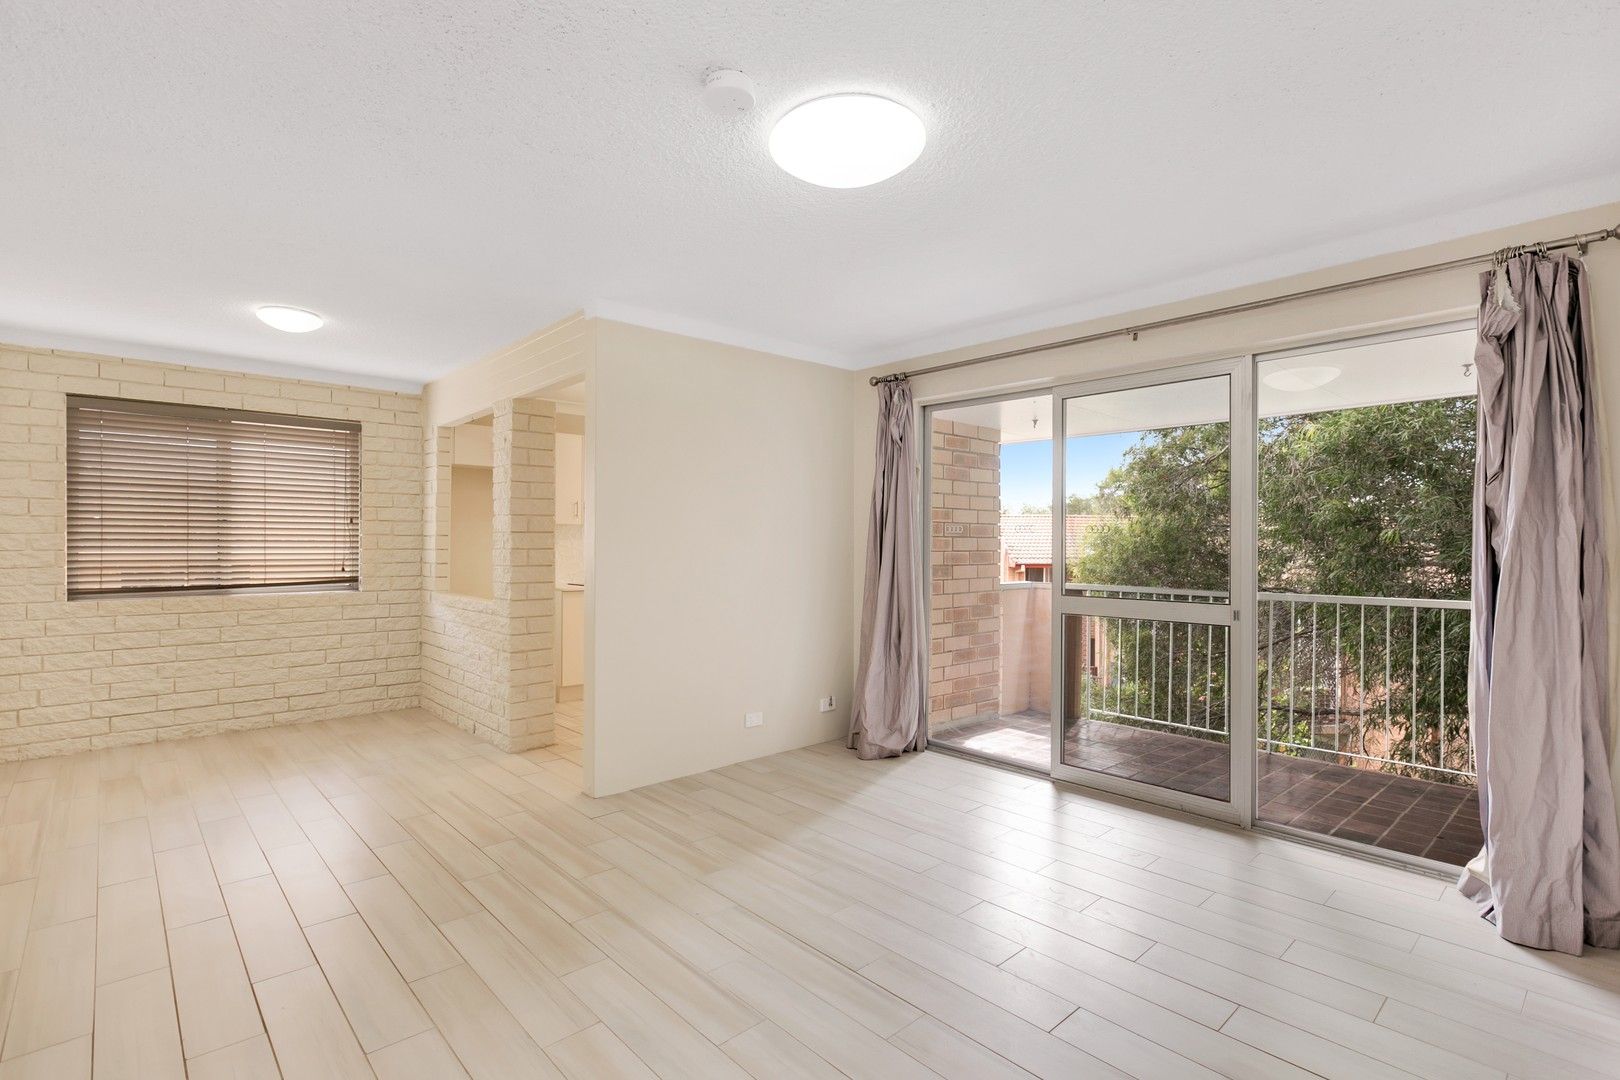 2 bedrooms Apartment / Unit / Flat in 10/5 Merewether Street MEREWETHER NSW, 2291